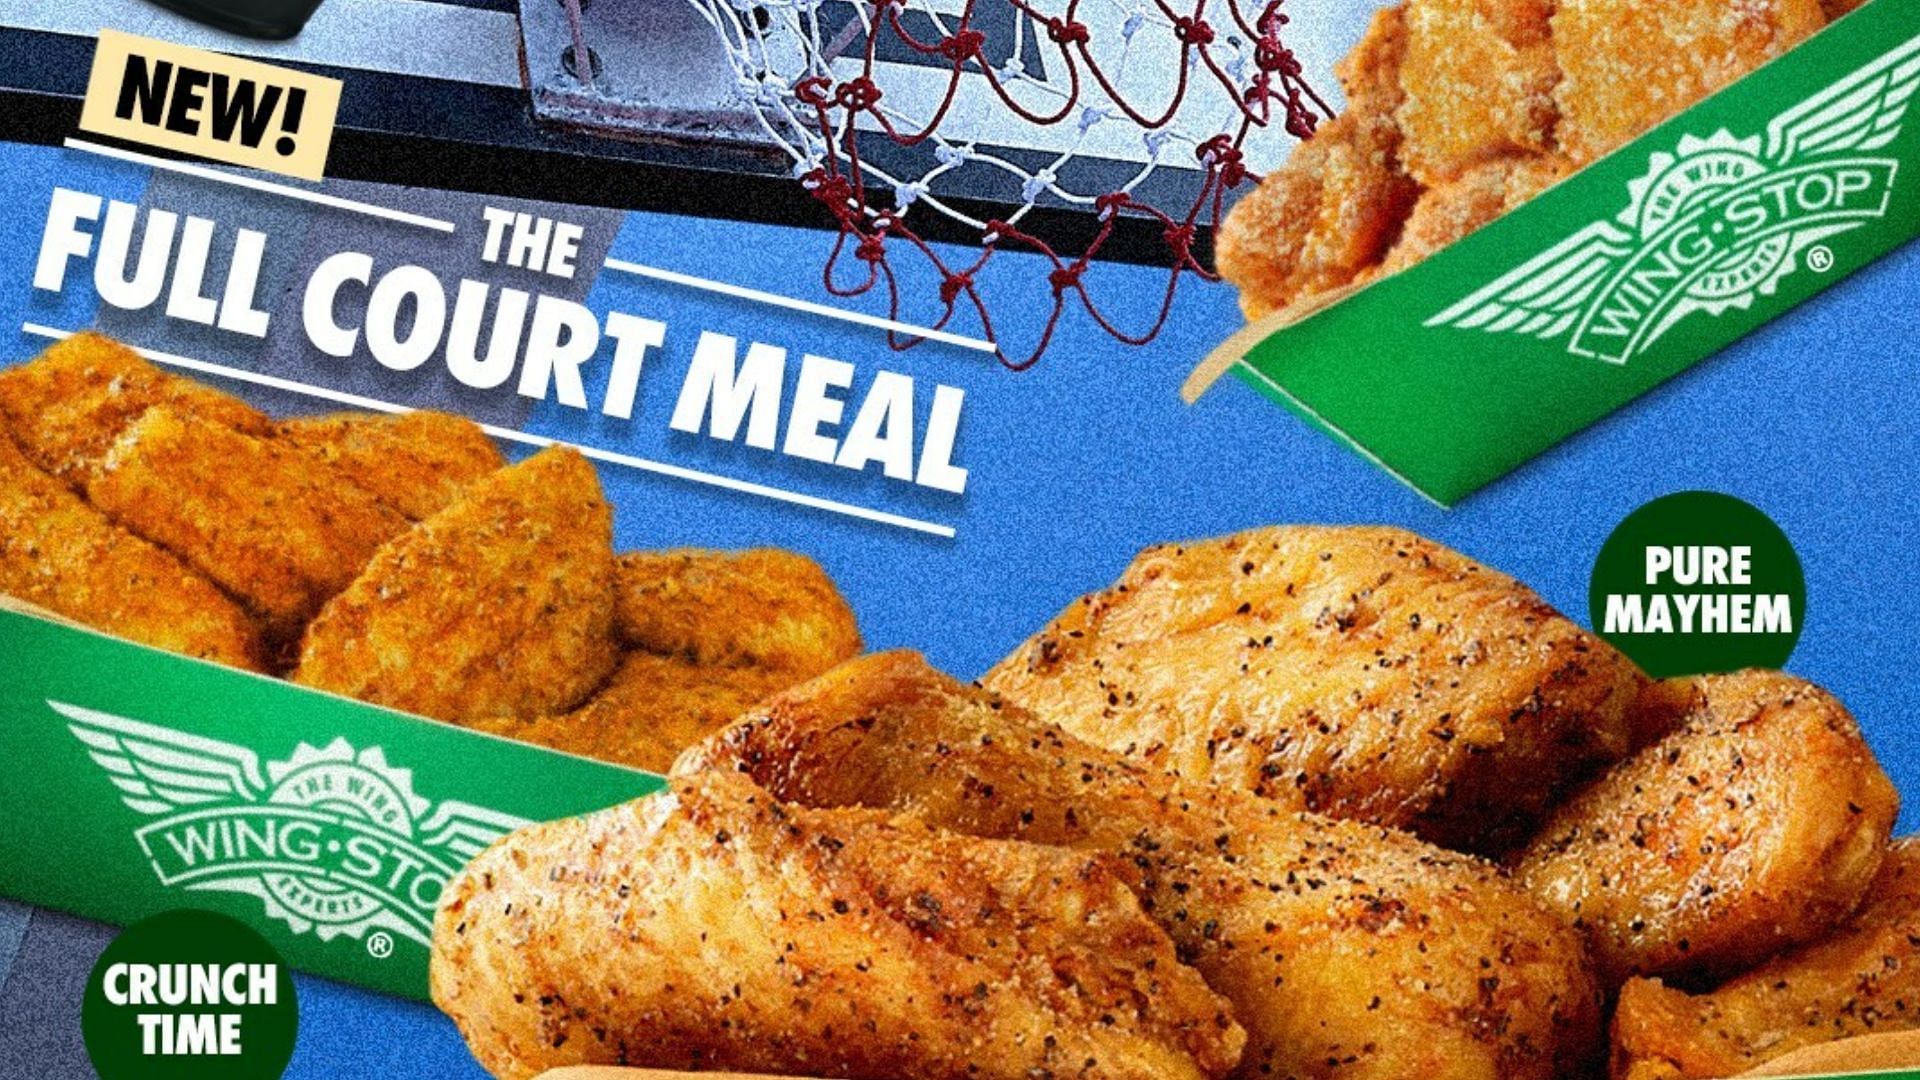 Wingstop introduces three new flavors for the Basketball tournaments (Image via Wingstop)